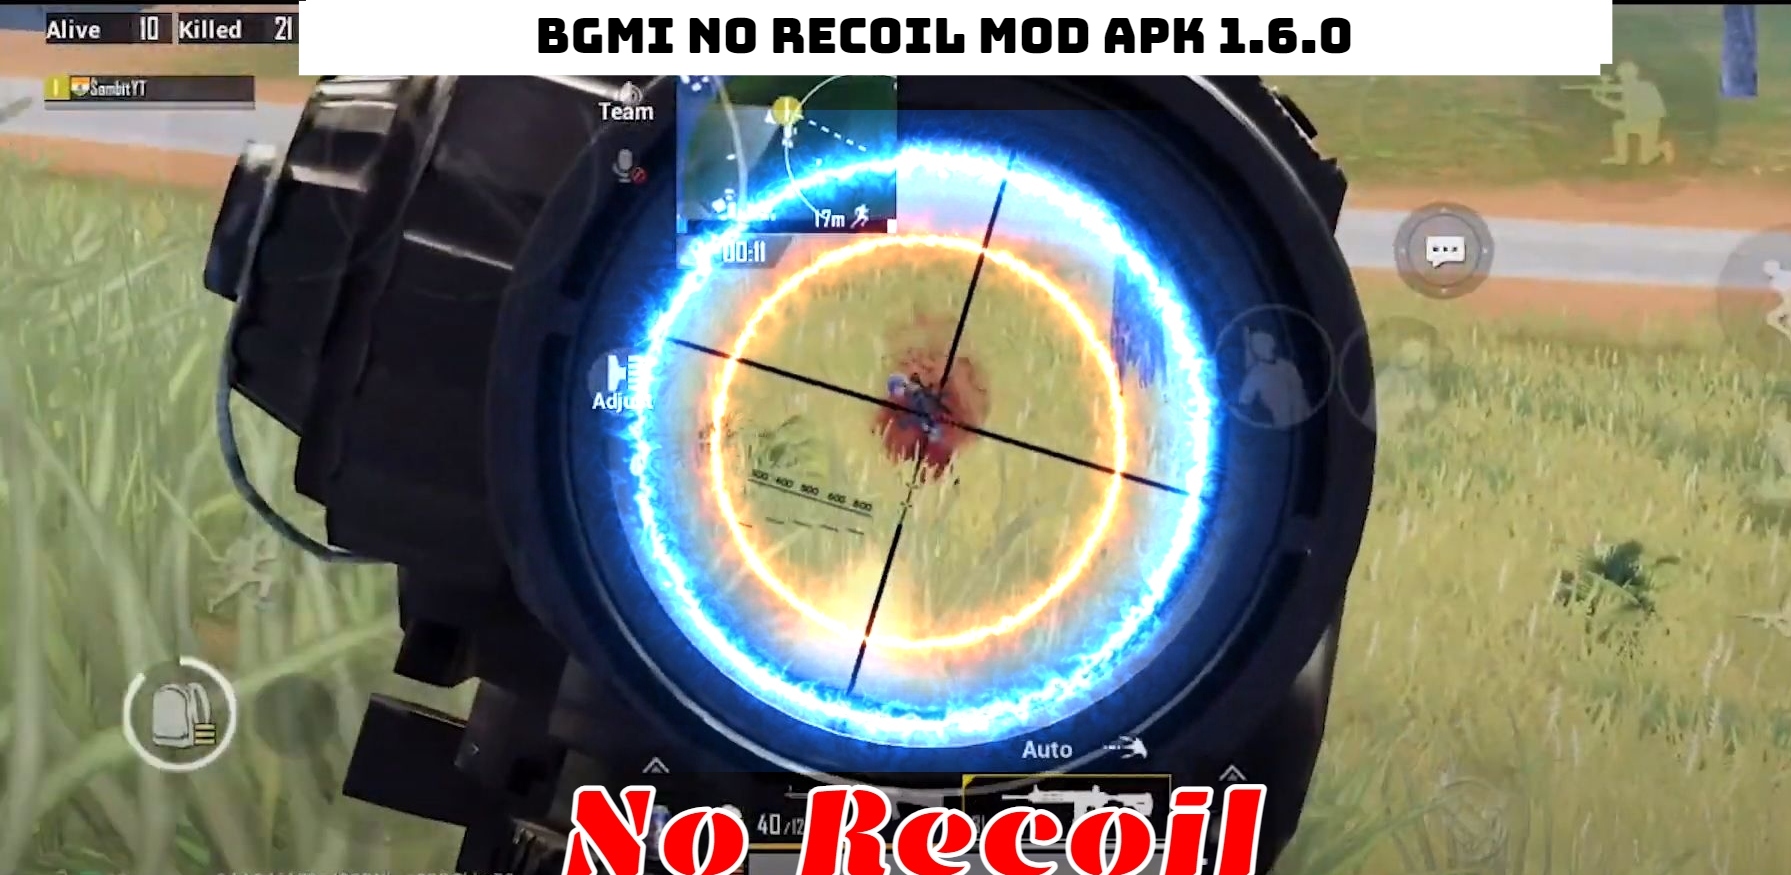 You are currently viewing BGMI No Recoil Mod Apk 1.6.0 C1S2 Free Download